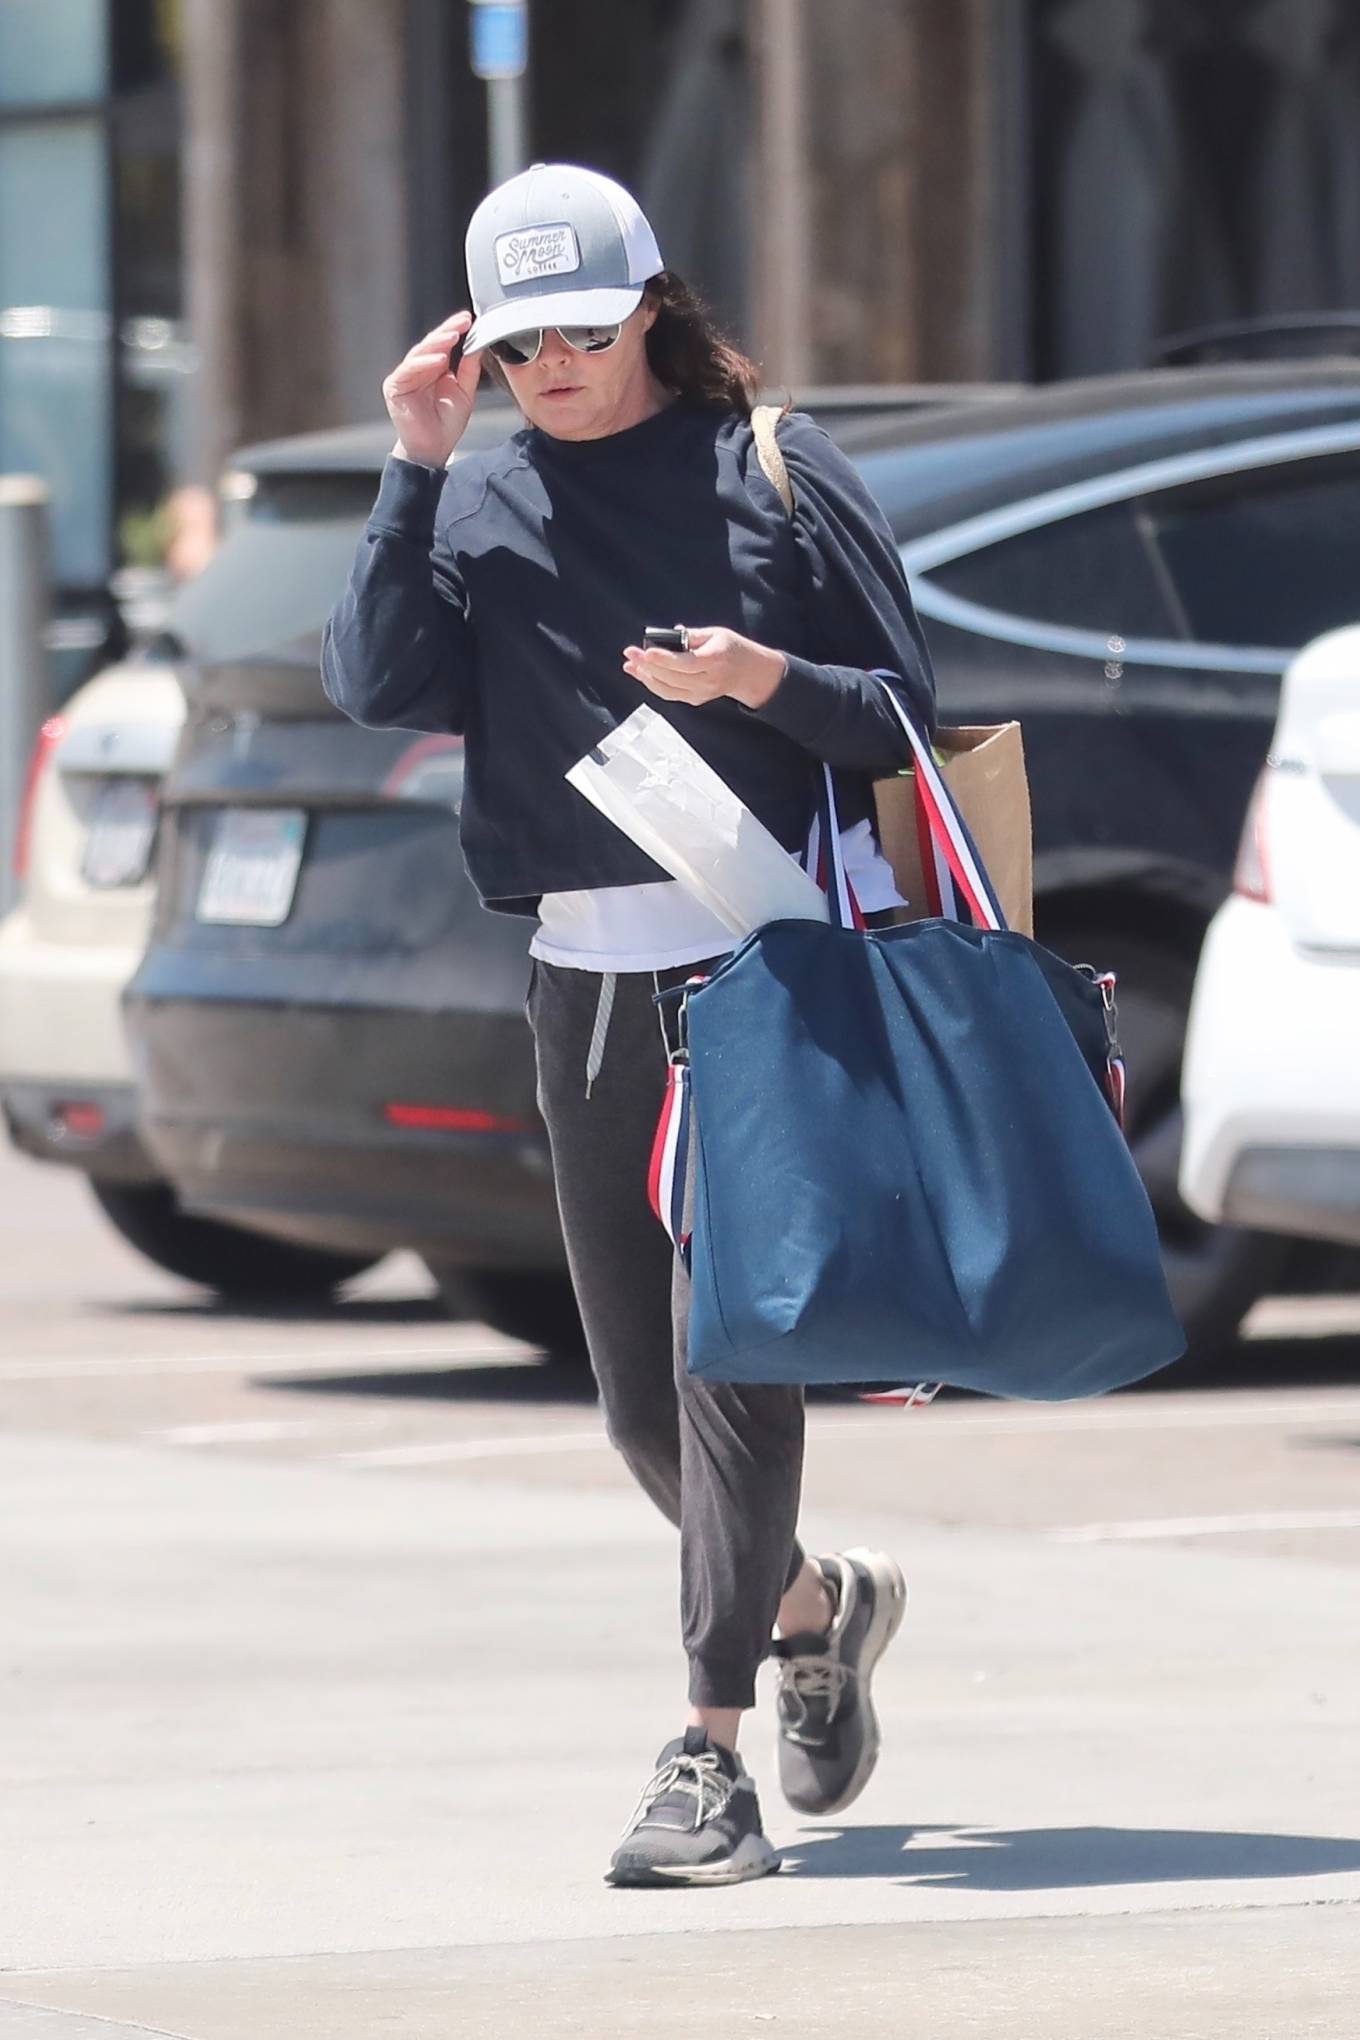 Shannen Doherty 2022 : Shannen Doherty – Shopping candids at Vintage Grocers in Malibu-01